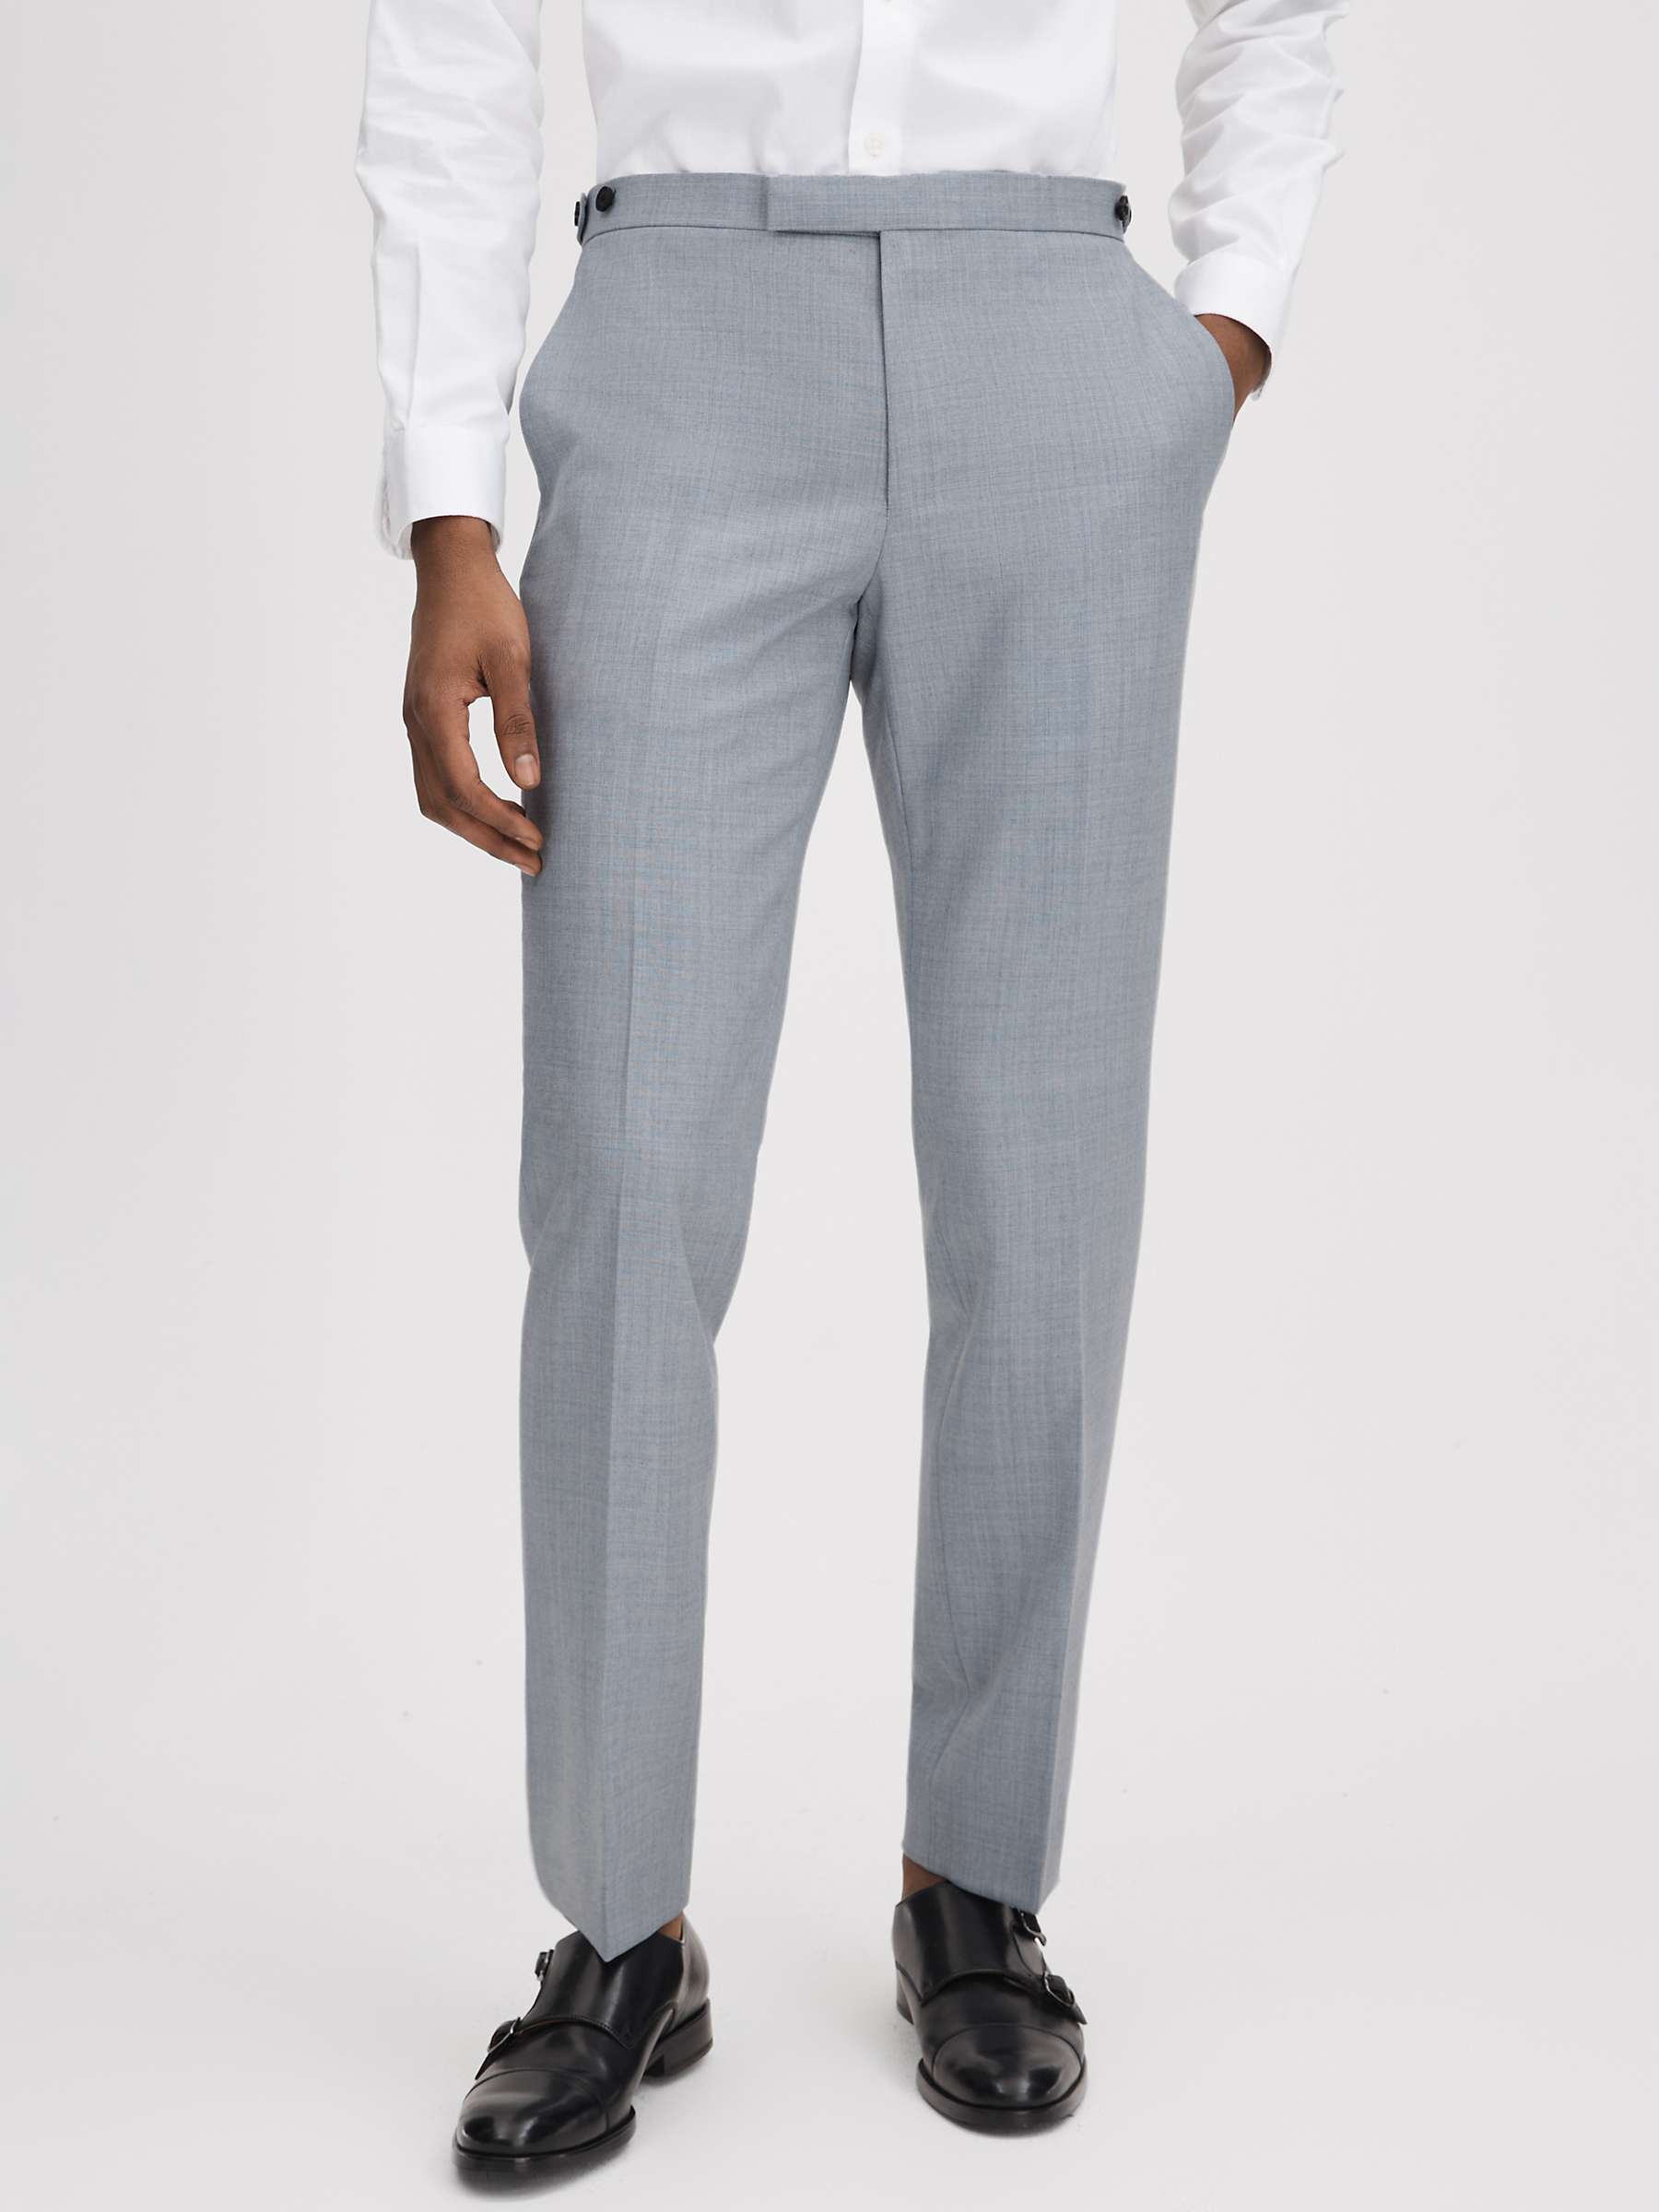 Buy Reiss Dandy Straight Fit Trousers, Soft Blue Online at johnlewis.com